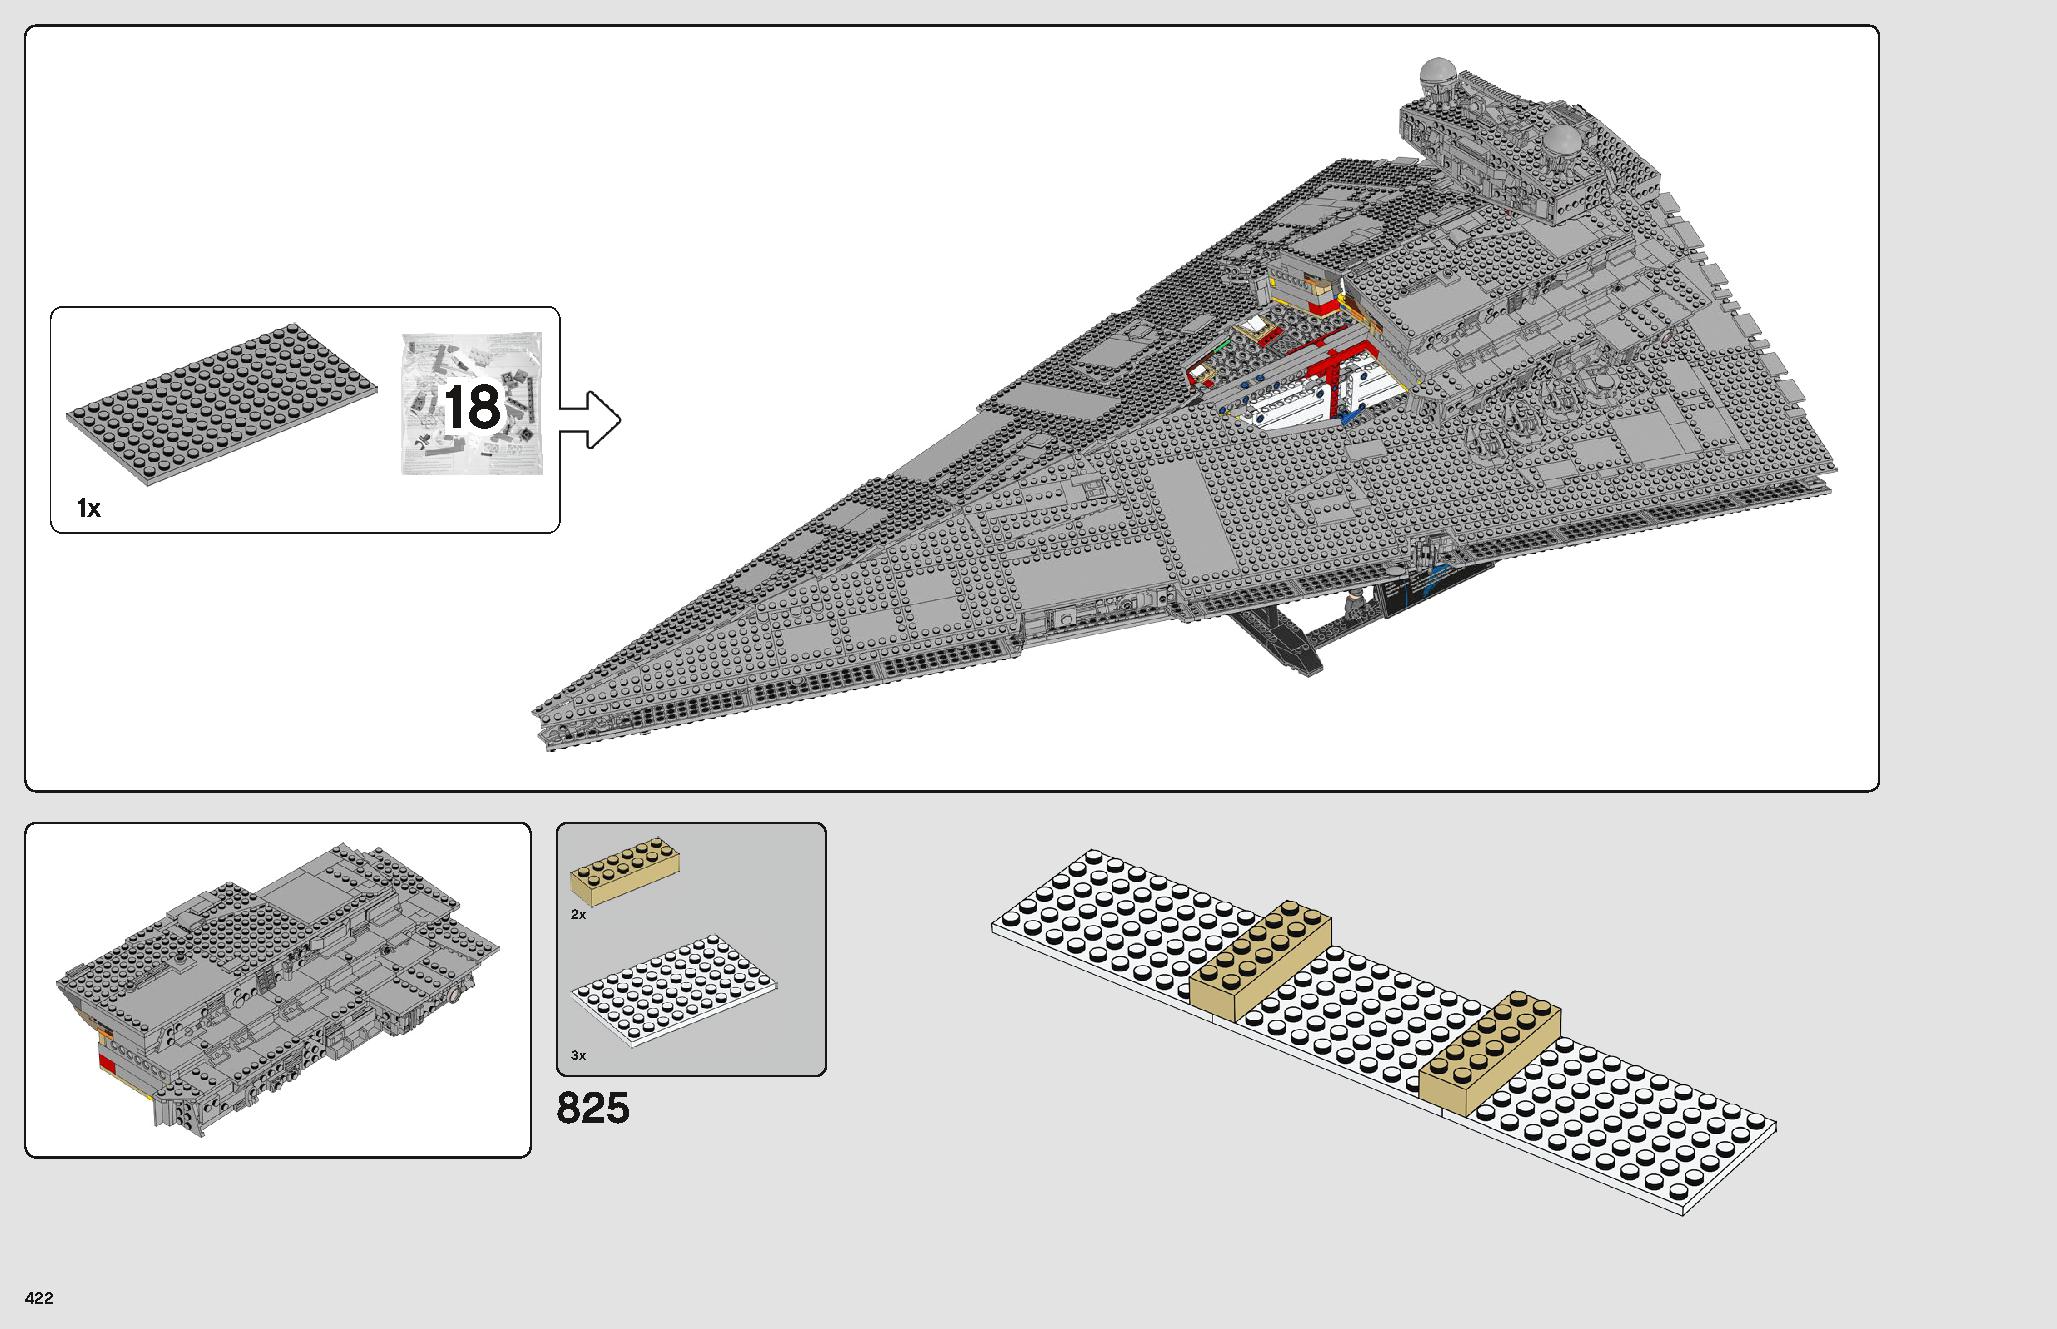 Imperial Star Destroyer 75252 LEGO information LEGO instructions 422 page